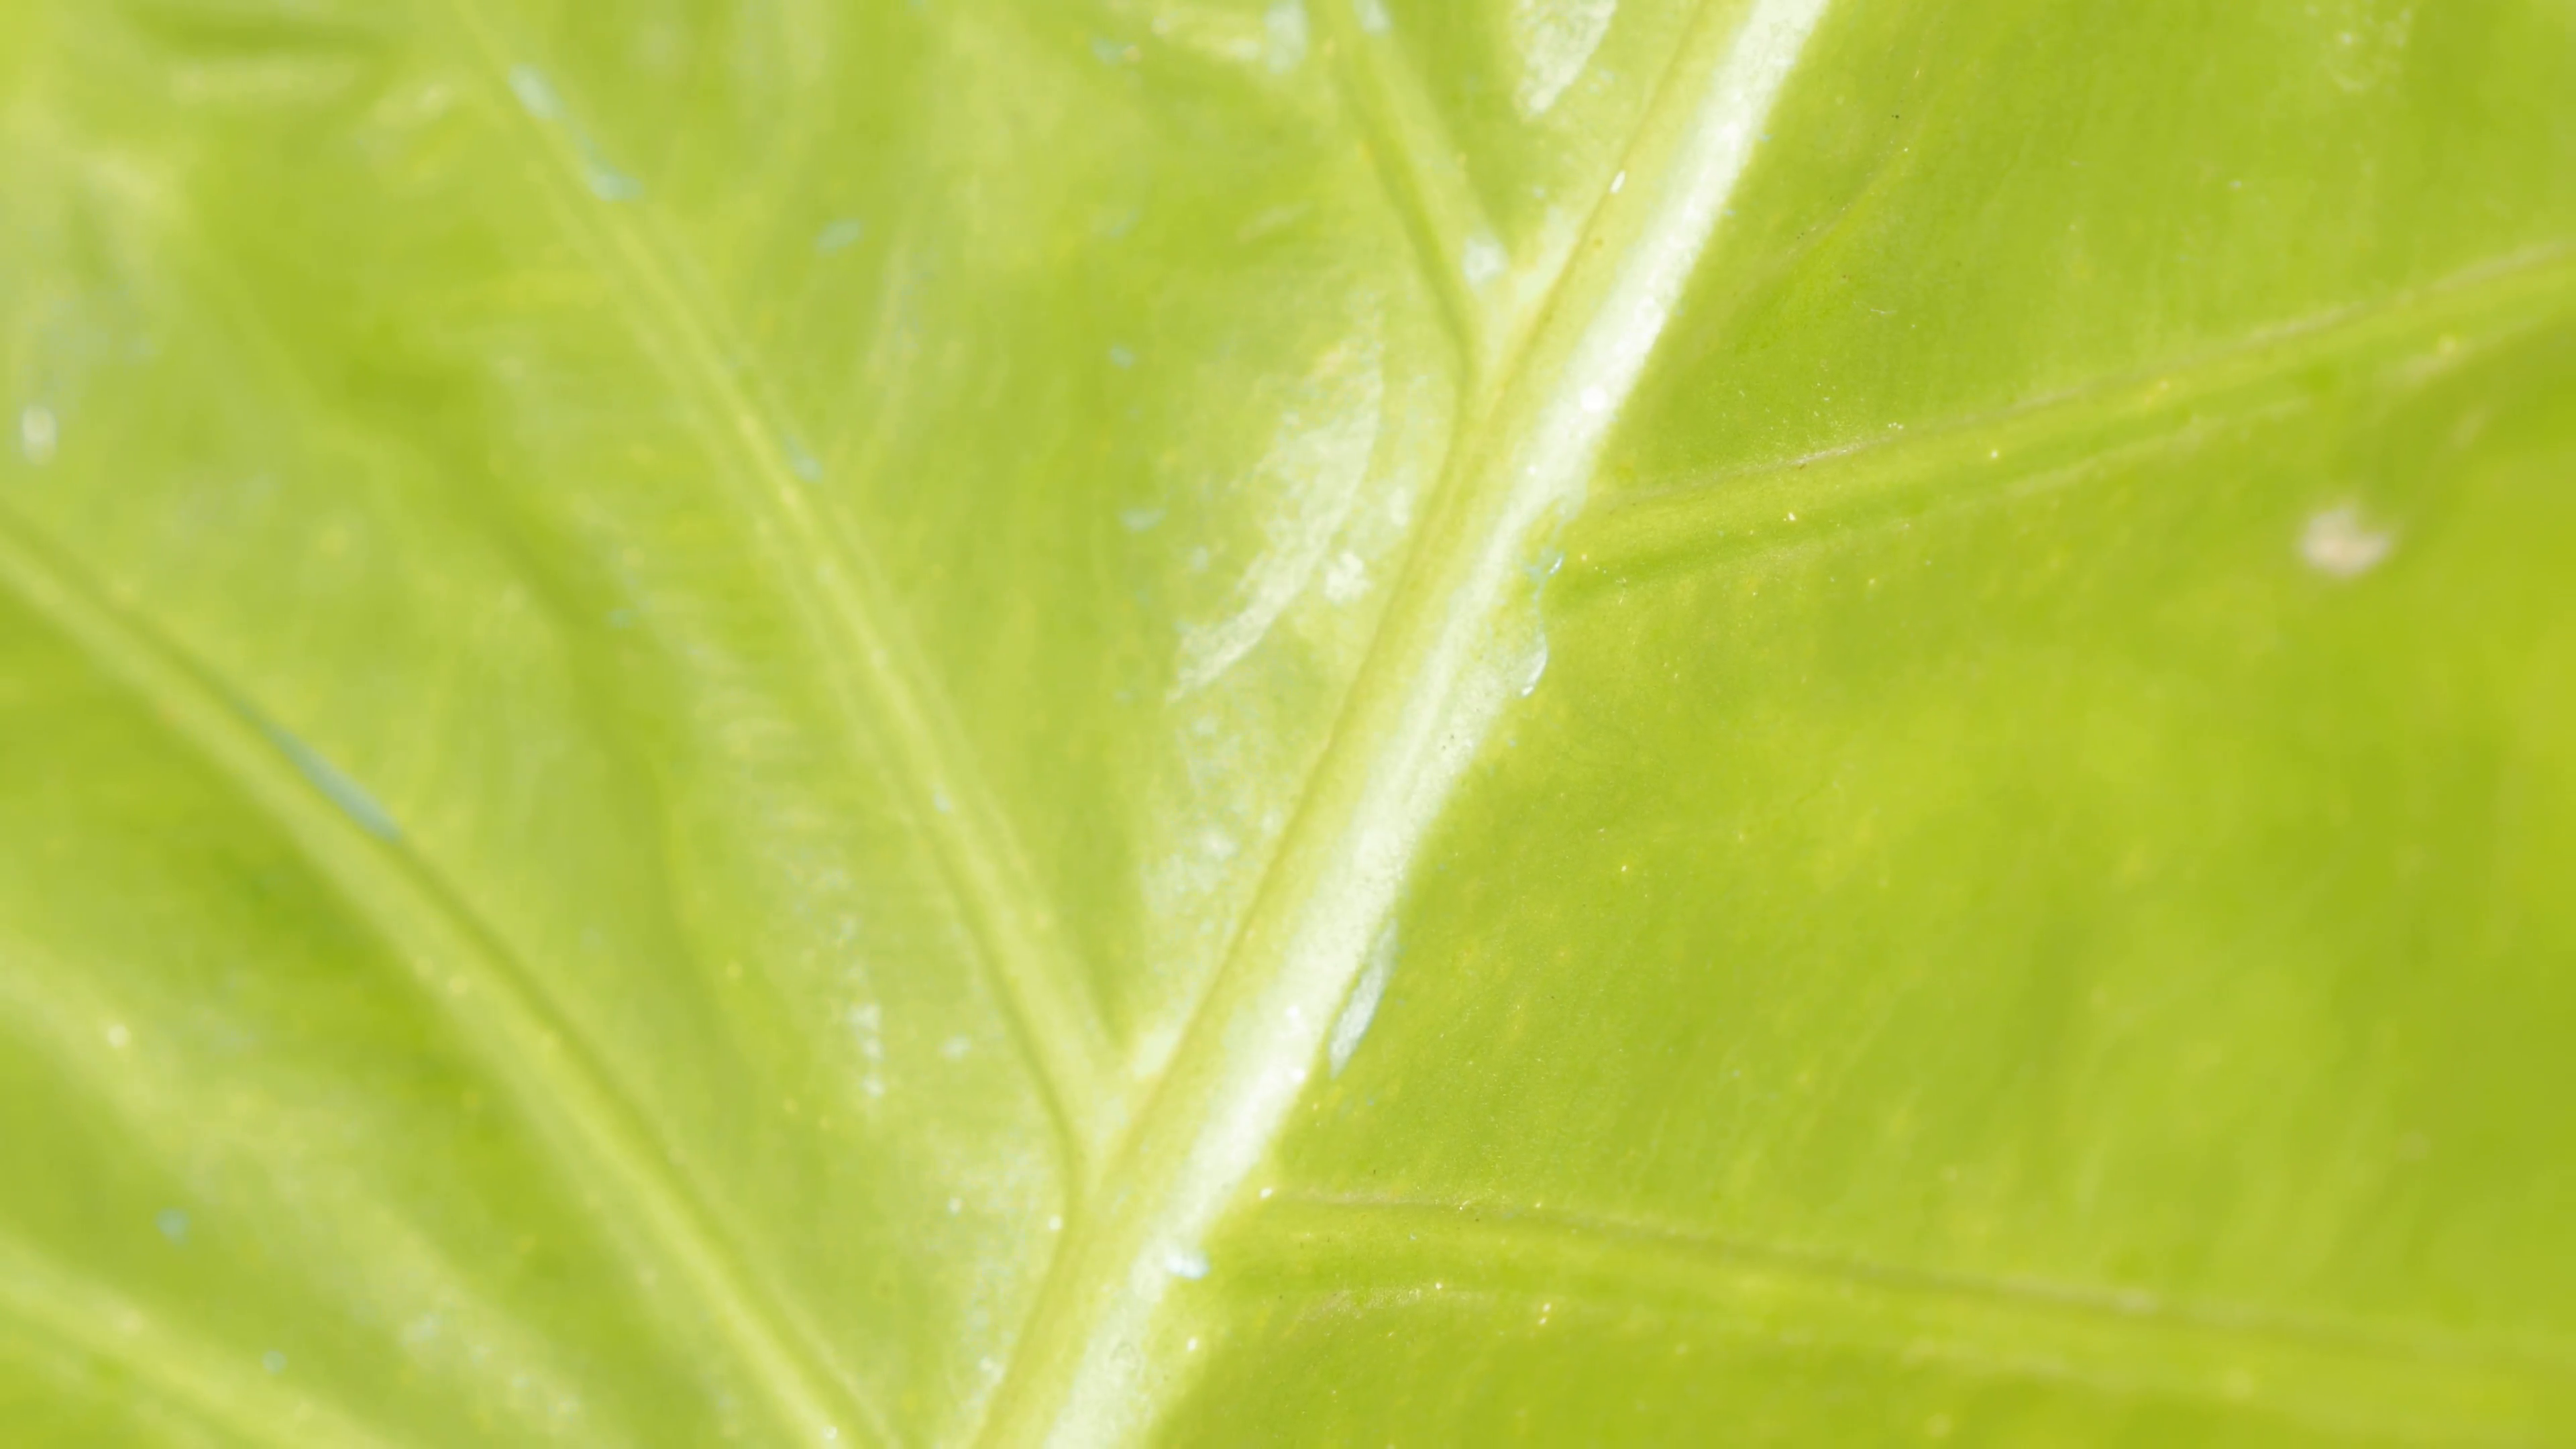 Green leaf texture close-up details 4K 2160p UHD video Stock Video ...